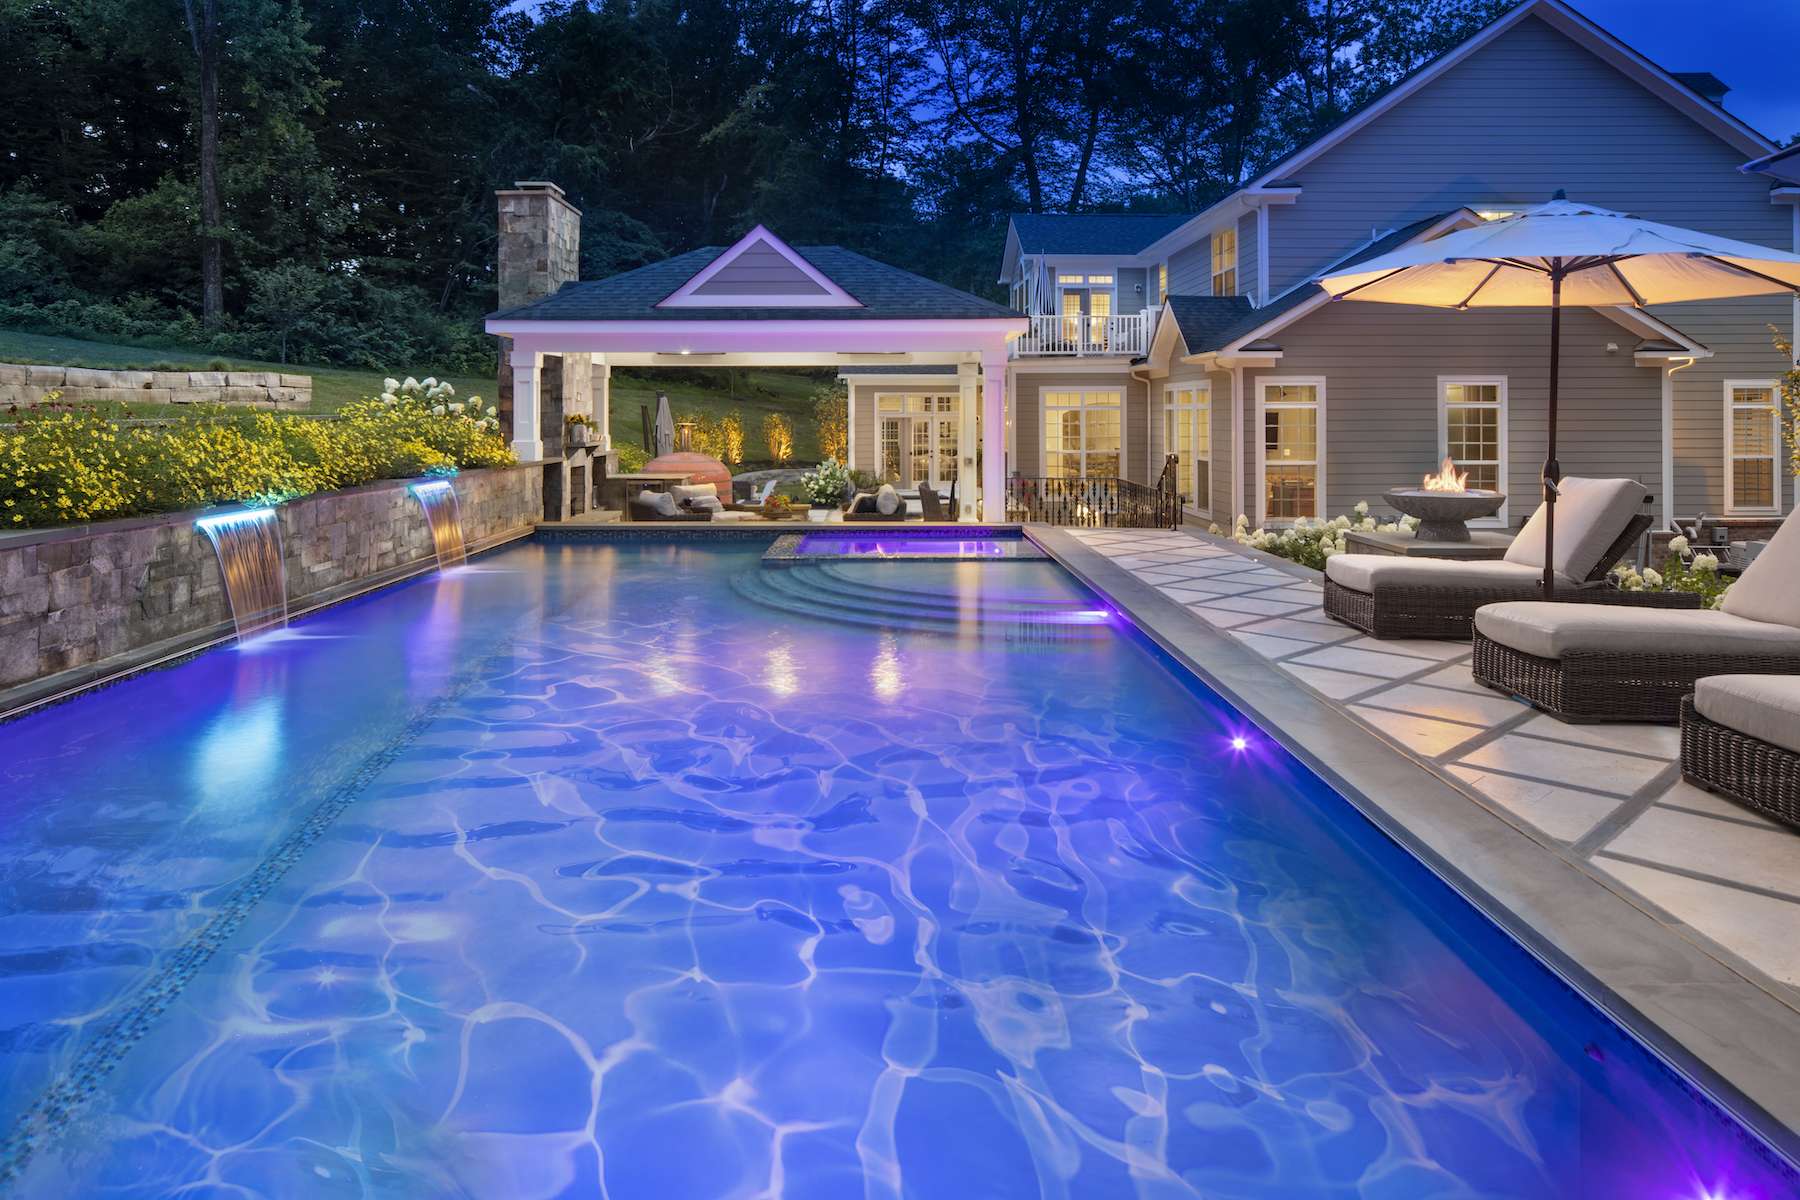 Pool with sheer descent waterfalls and travertine patio